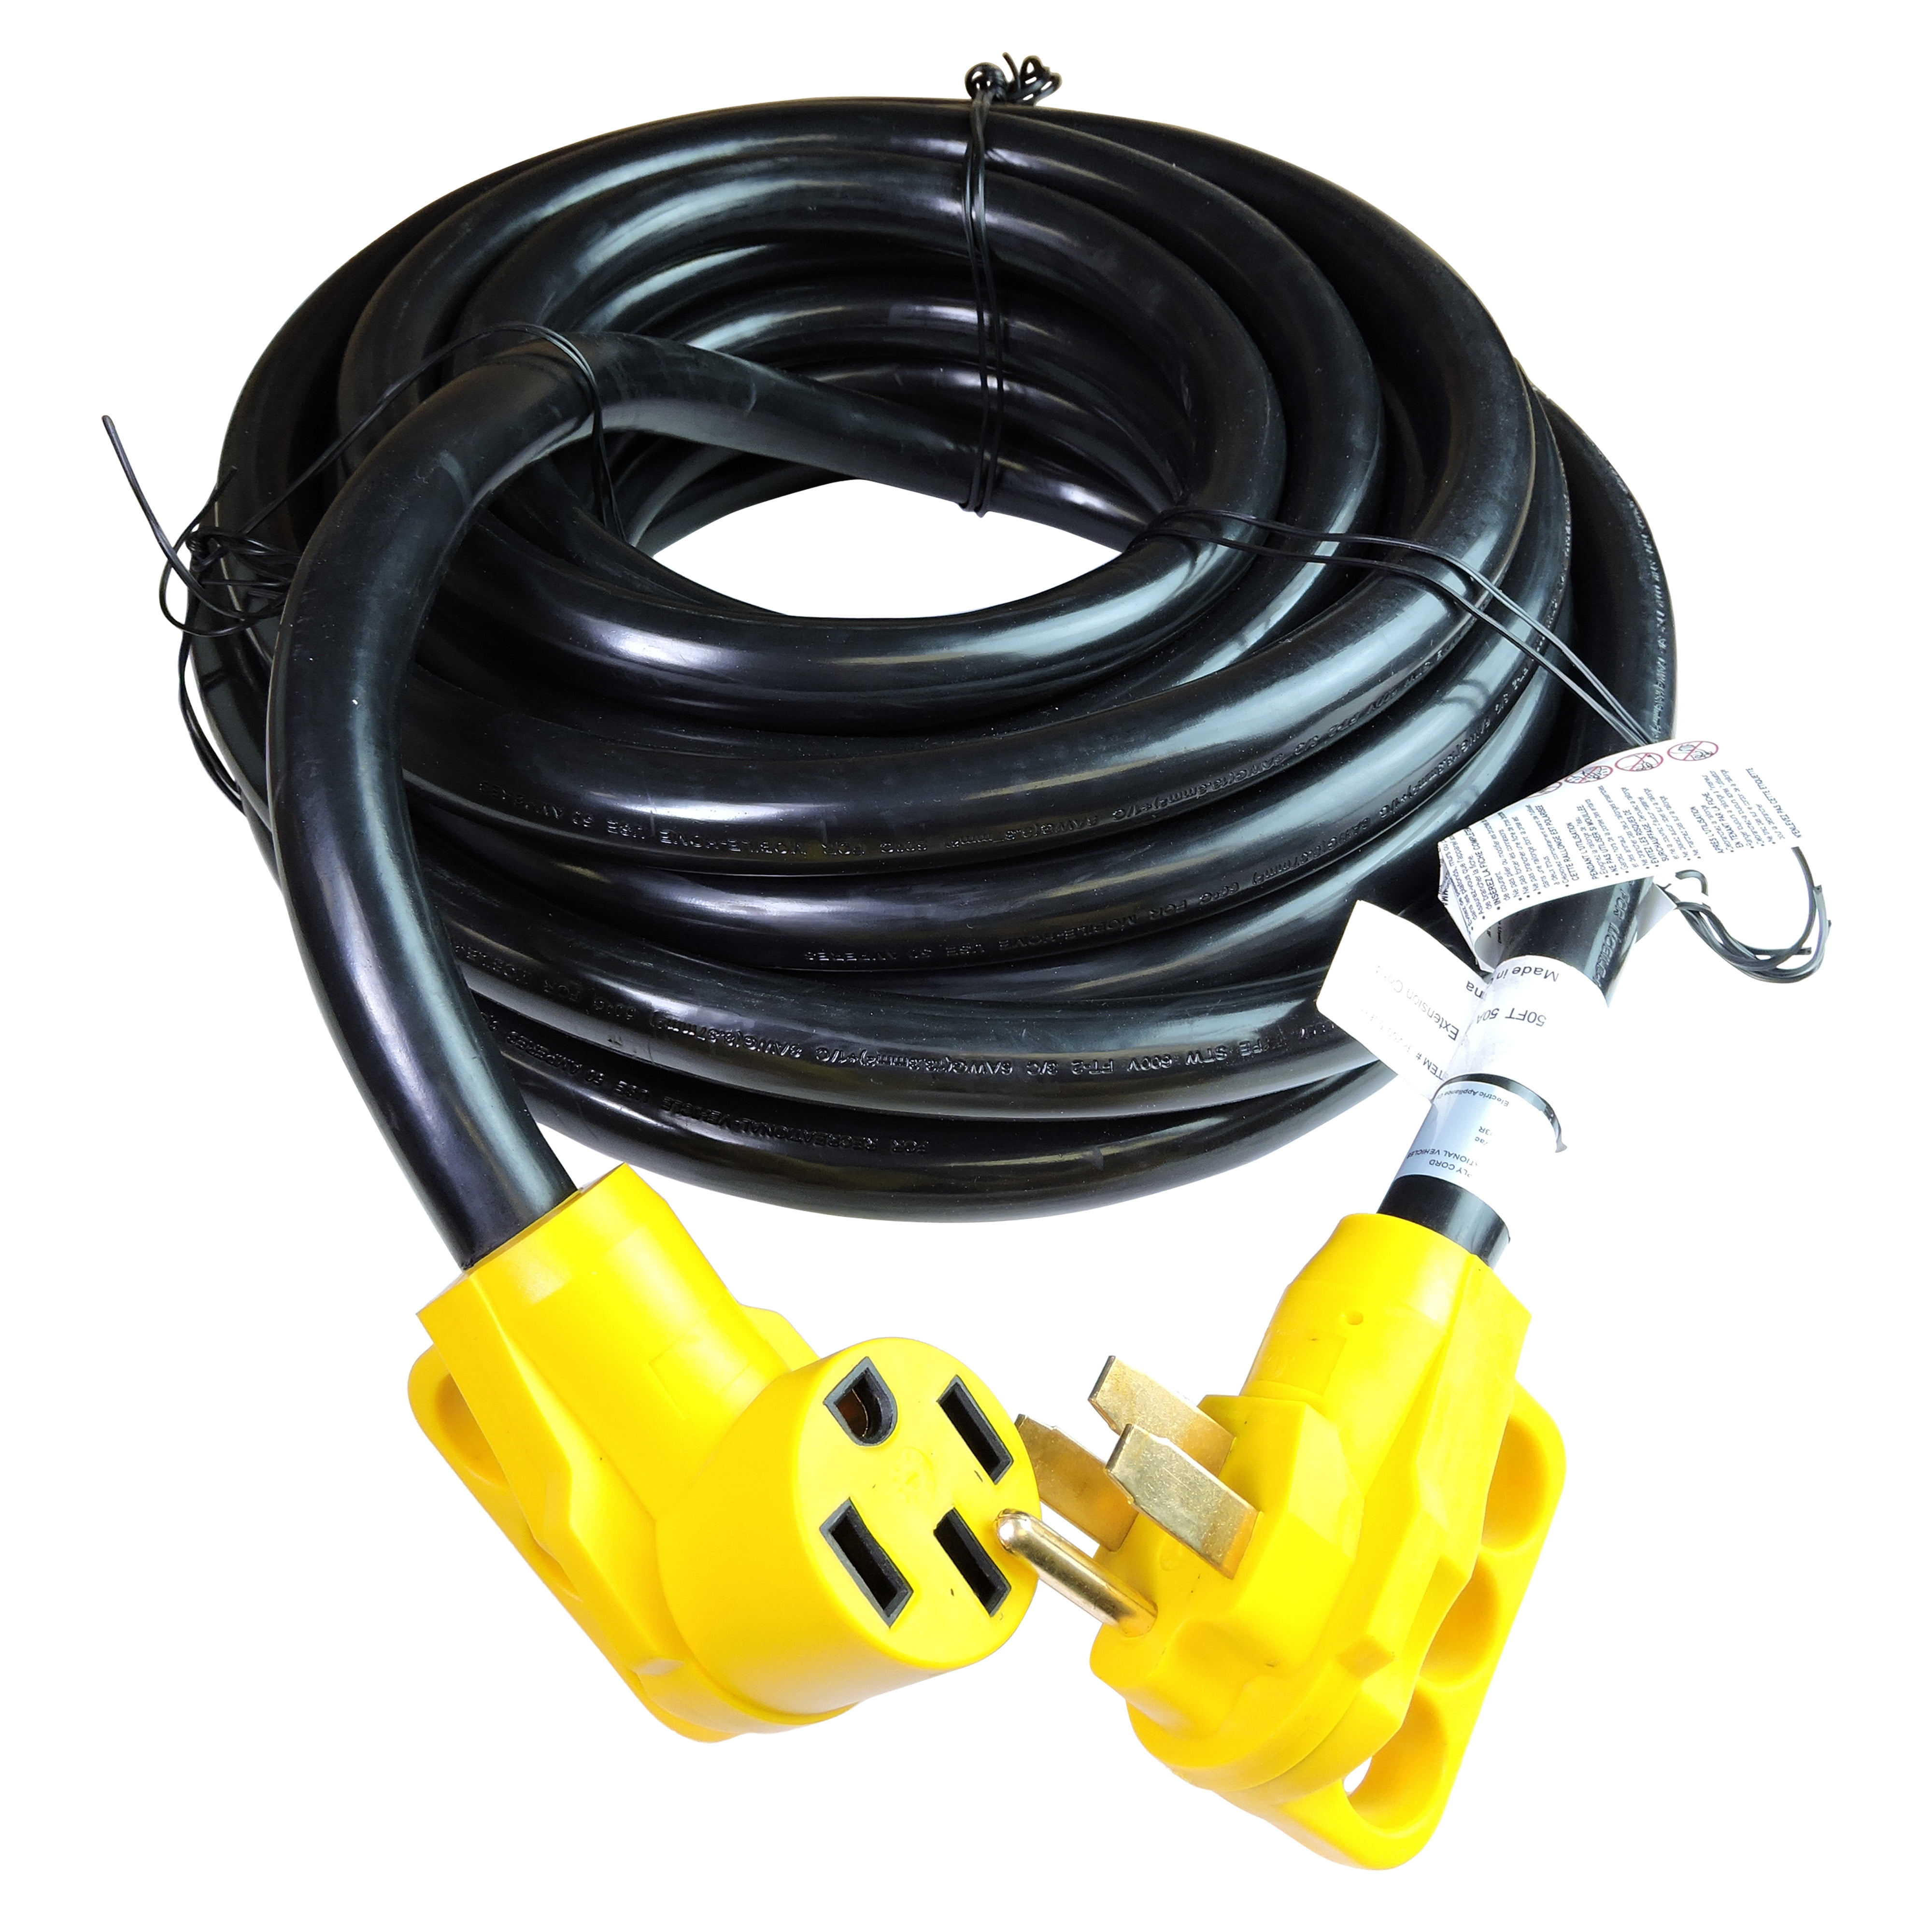 100 ft 50 amp rv extension cord with Finger Holder